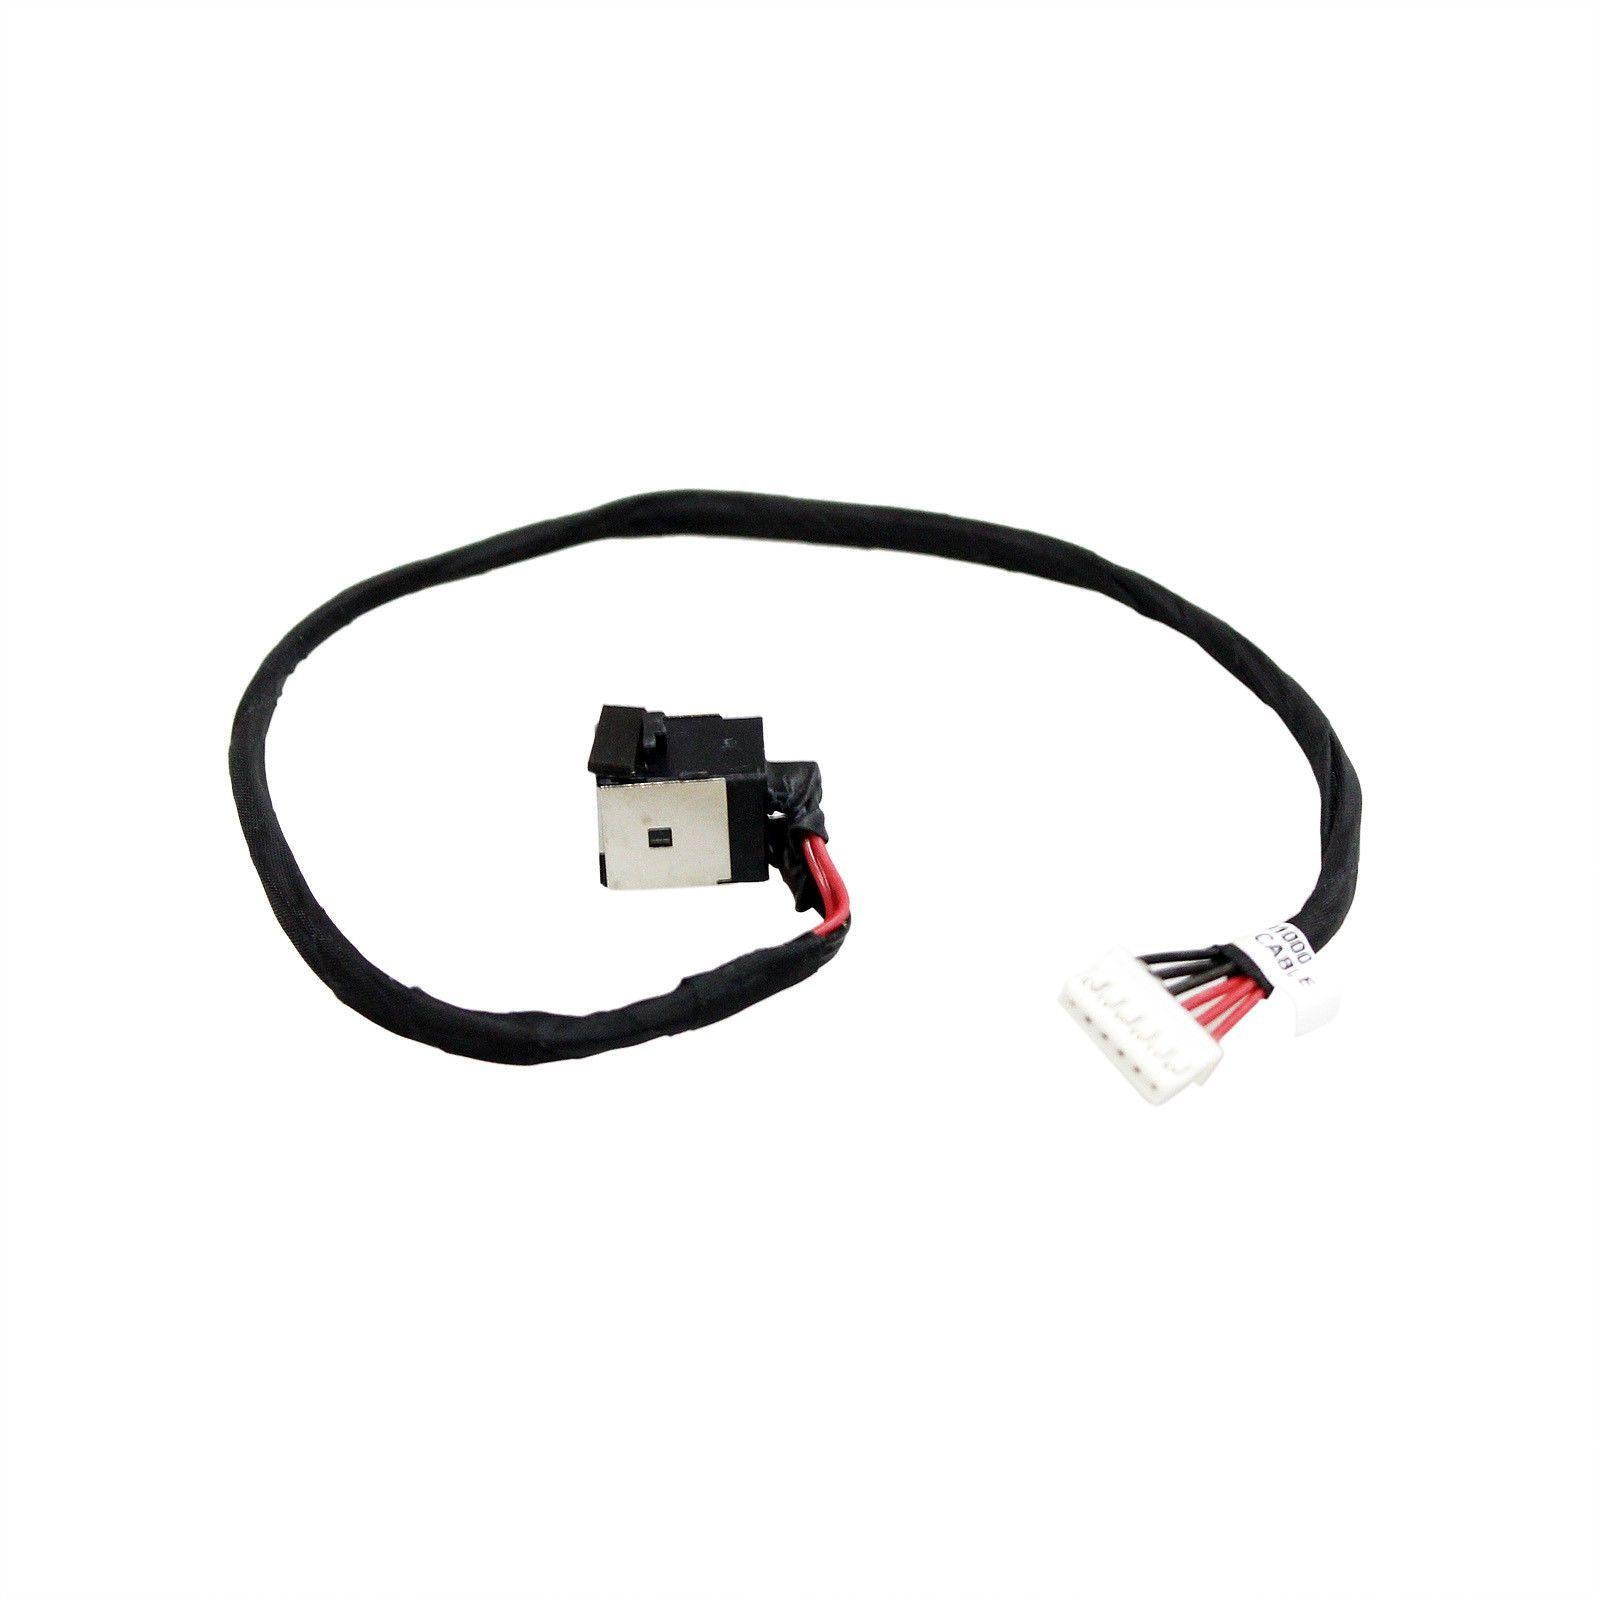 New Asus A750JA A750JB A750JN A750LA A750LB A750LN 4 Pin DC Jack Cable 14004-01800000